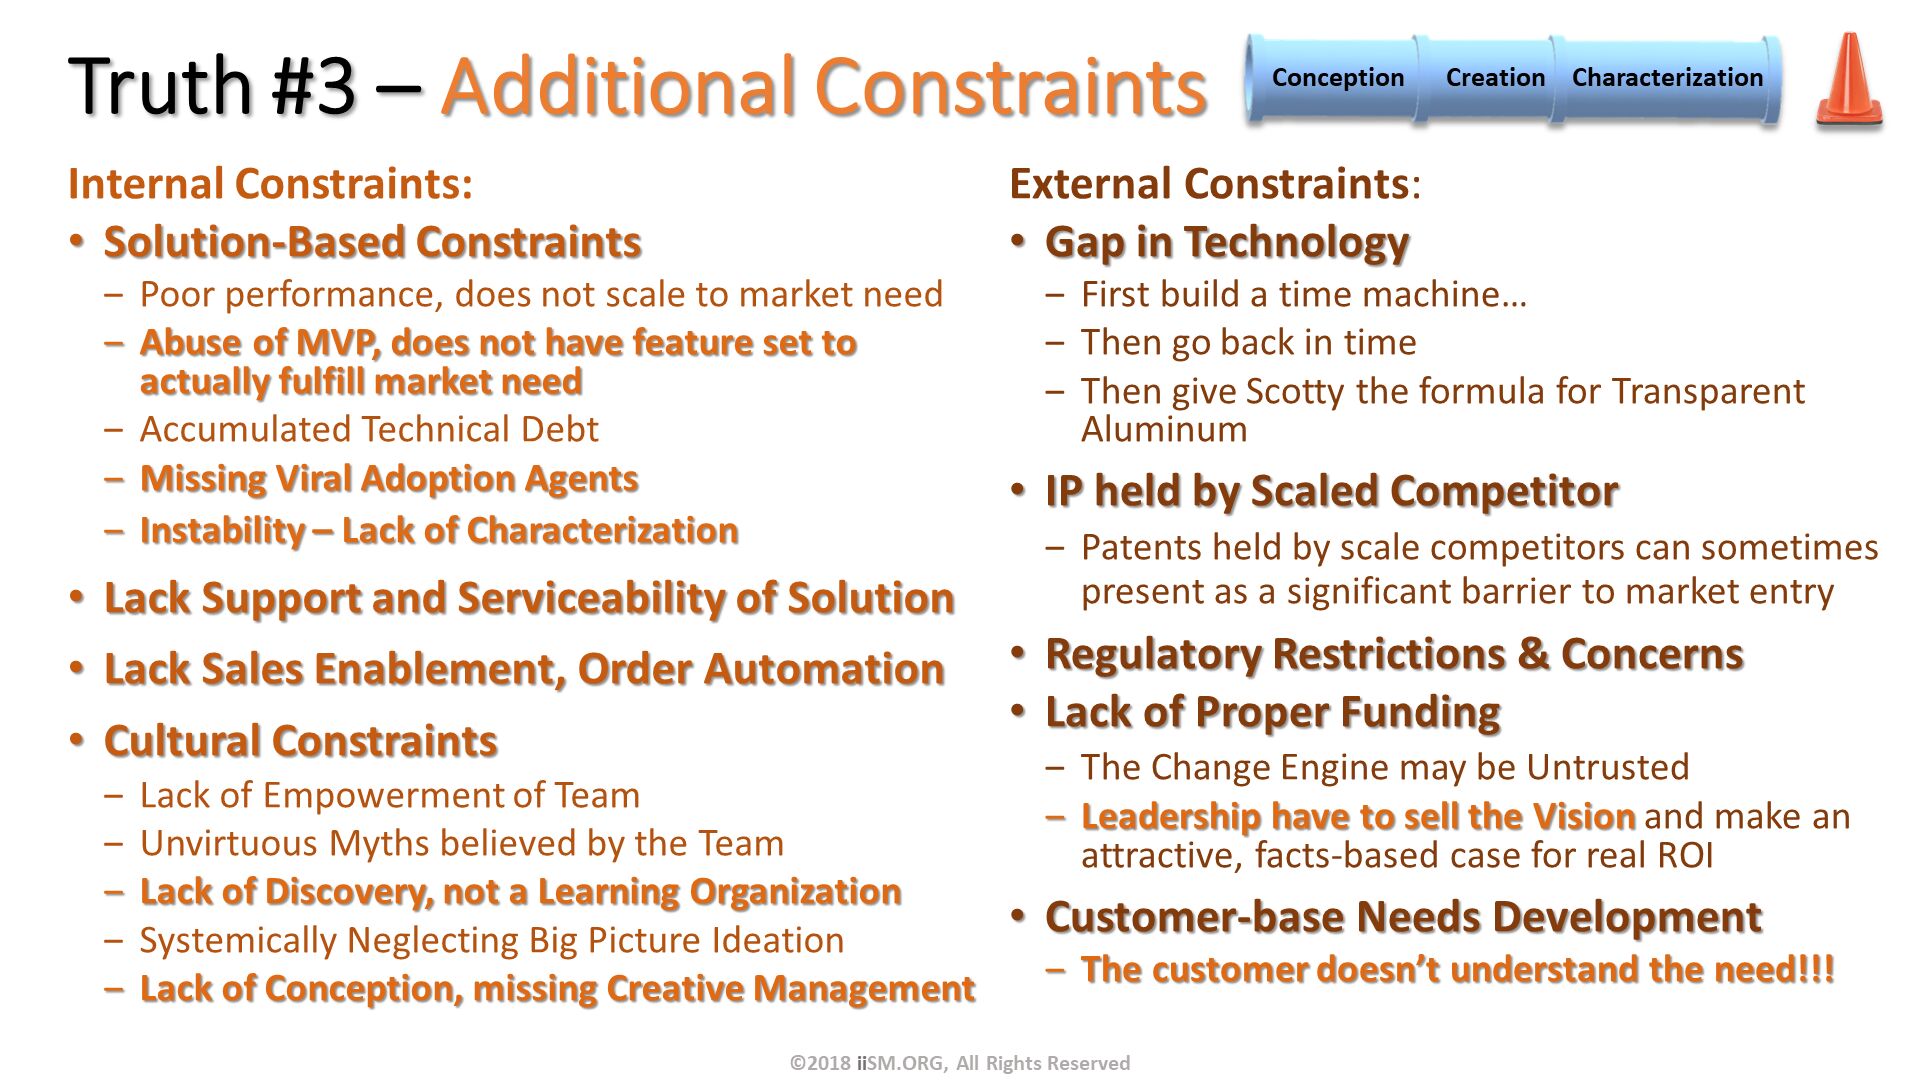 Truth #3 – Additional Constraints . External Constraints:
Gap in Technology
First build a time machine…
Then go back in time
Then give Scotty the formula for Transparent Aluminum 
IP held by Scaled Competitor
Patents held by scale competitors can sometimes present as a significant barrier to market entry
Regulatory Restrictions & Concerns
Lack of Proper Funding
The Change Engine may be Untrusted
Leadership have to sell the Vision and make an attractive, facts-based case for real ROI
Customer-base Needs Development
The customer doesn’t understand the need!!!

. Internal Constraints:
Solution-Based Constraints
Poor performance, does not scale to market need
Abuse of MVP, does not have feature set to actually fulfill market need
Accumulated Technical Debt
Missing Viral Adoption Agents
Instability – Lack of Characterization
Lack Support and Serviceability of Solution
Lack Sales Enablement, Order Automation
Cultural Constraints
Lack of Empowerment of Team
Unvirtuous Myths believed by the Team
Lack of Discovery, not a Learning Organization
Systemically Neglecting Big Picture Ideation
Lack of Conception, missing Creative Management

. ©2018 iiSM.ORG, All Rights Reserved. 